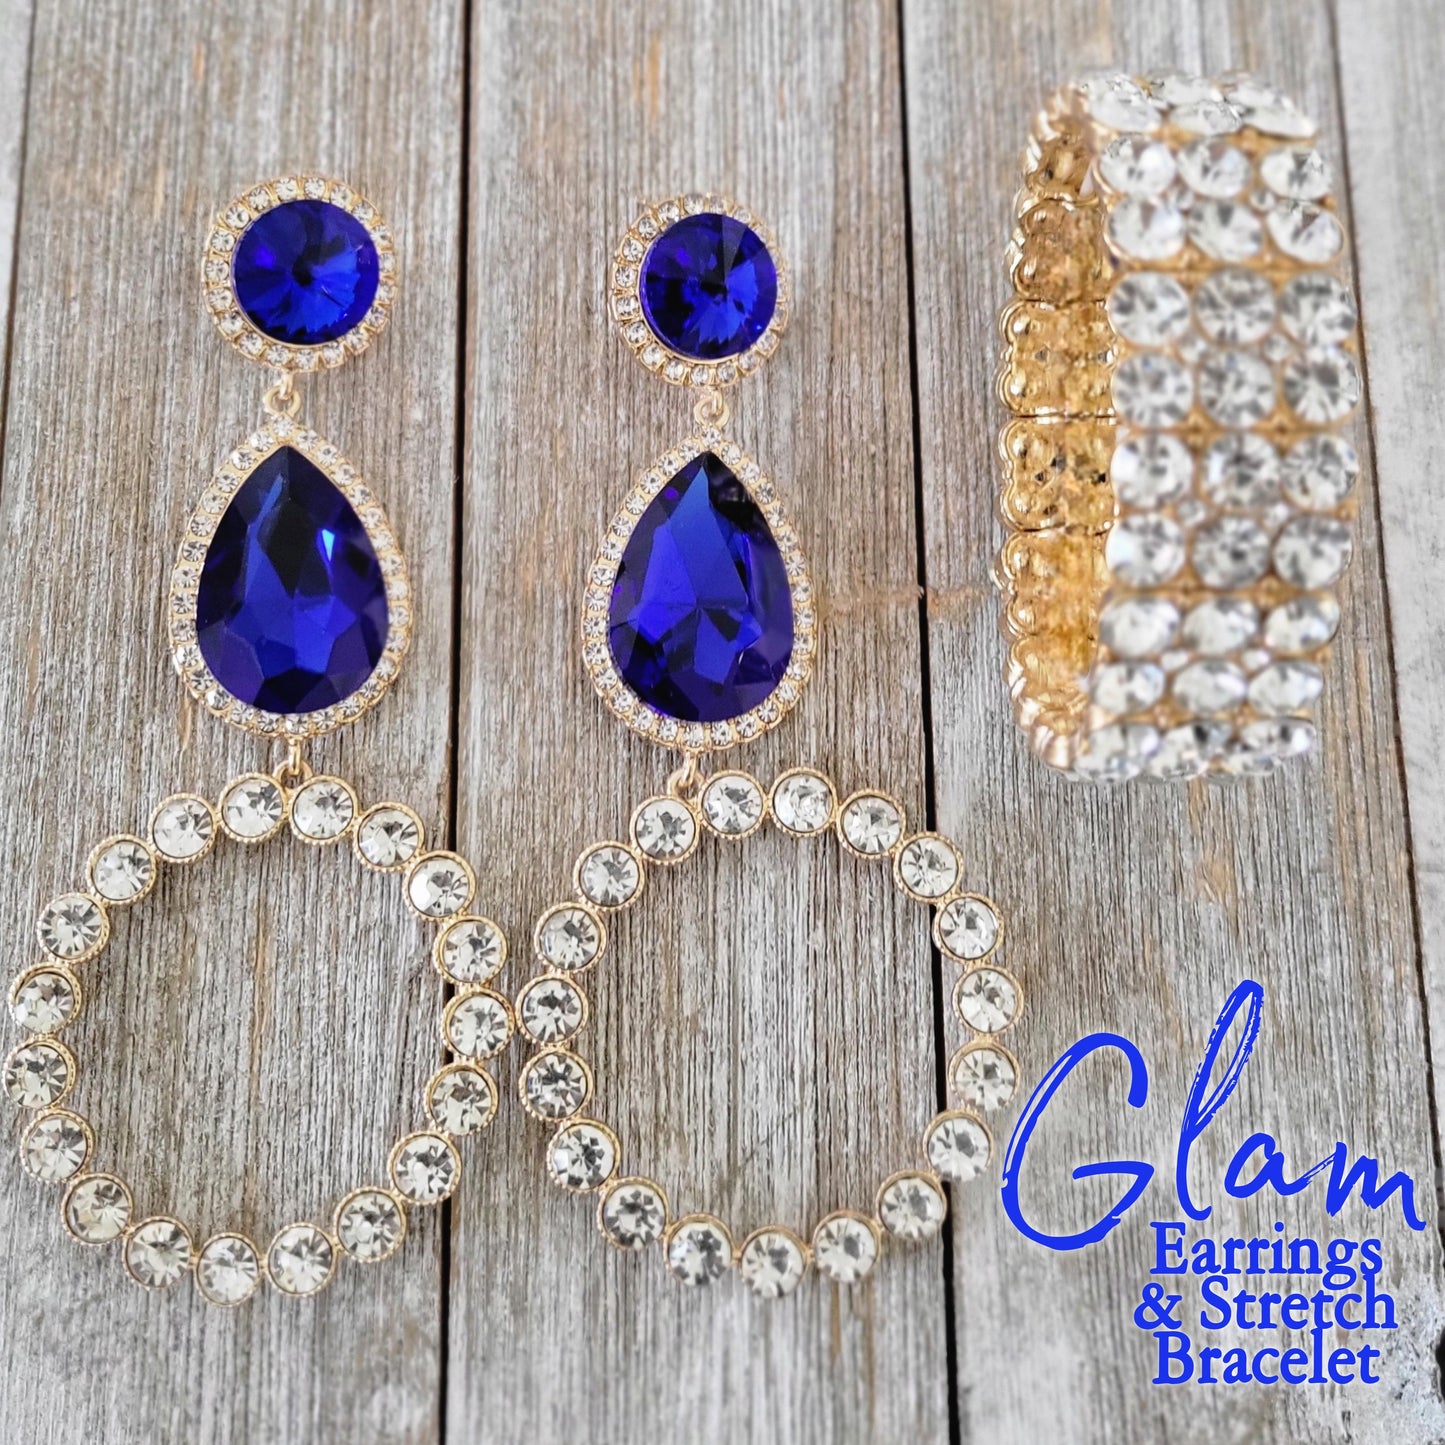 Glam Earrings and Stretch Bracelet Set